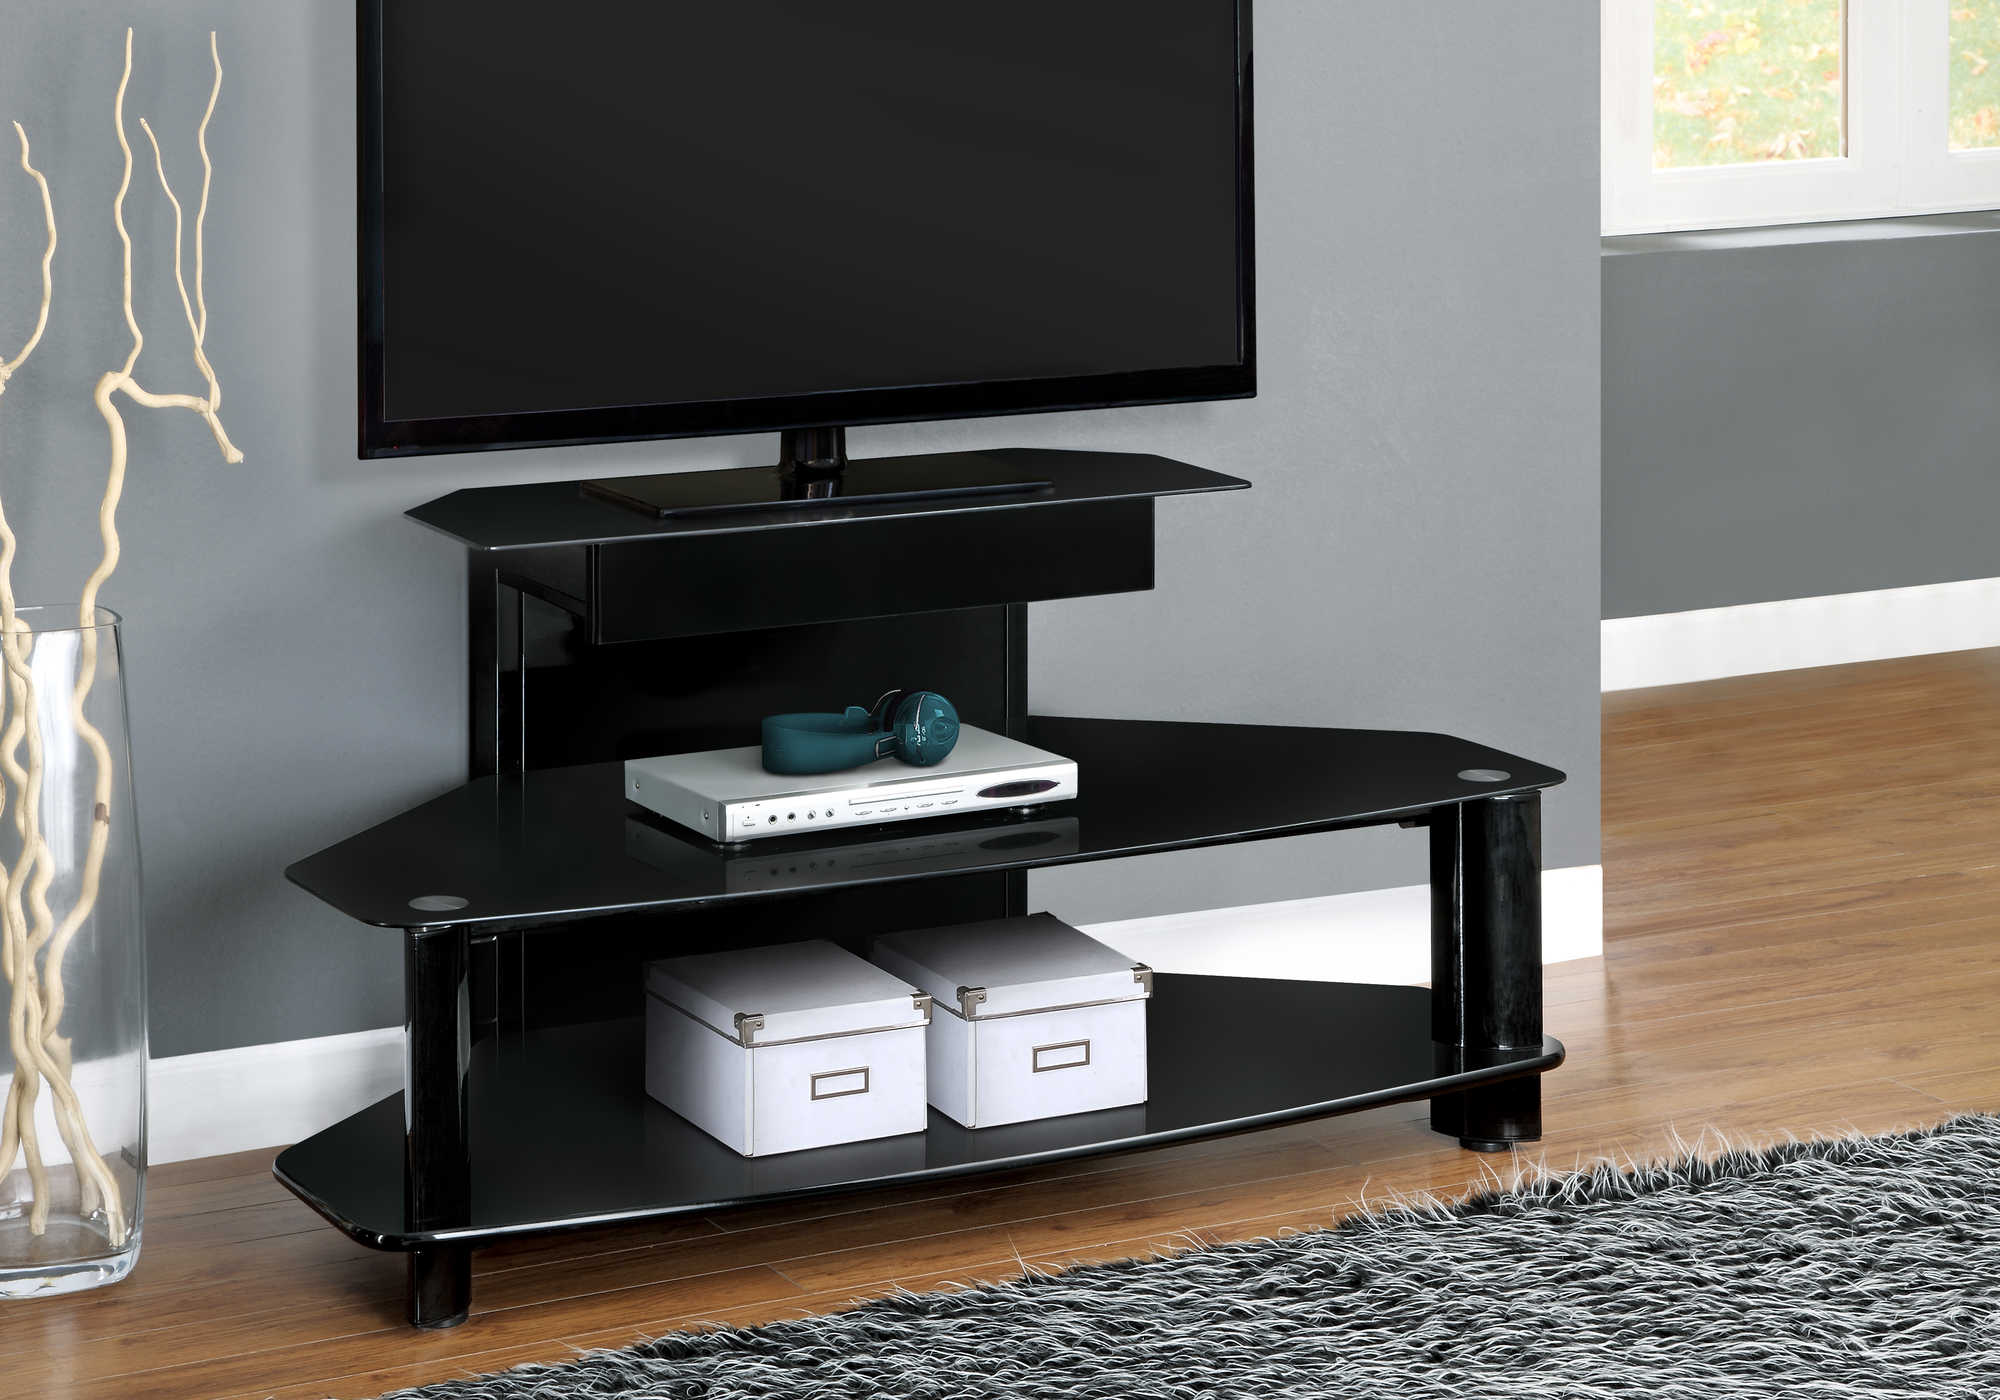 TV STAND - 48"L / GLOSSY BLACK WOOD / METAL / TEMPERED